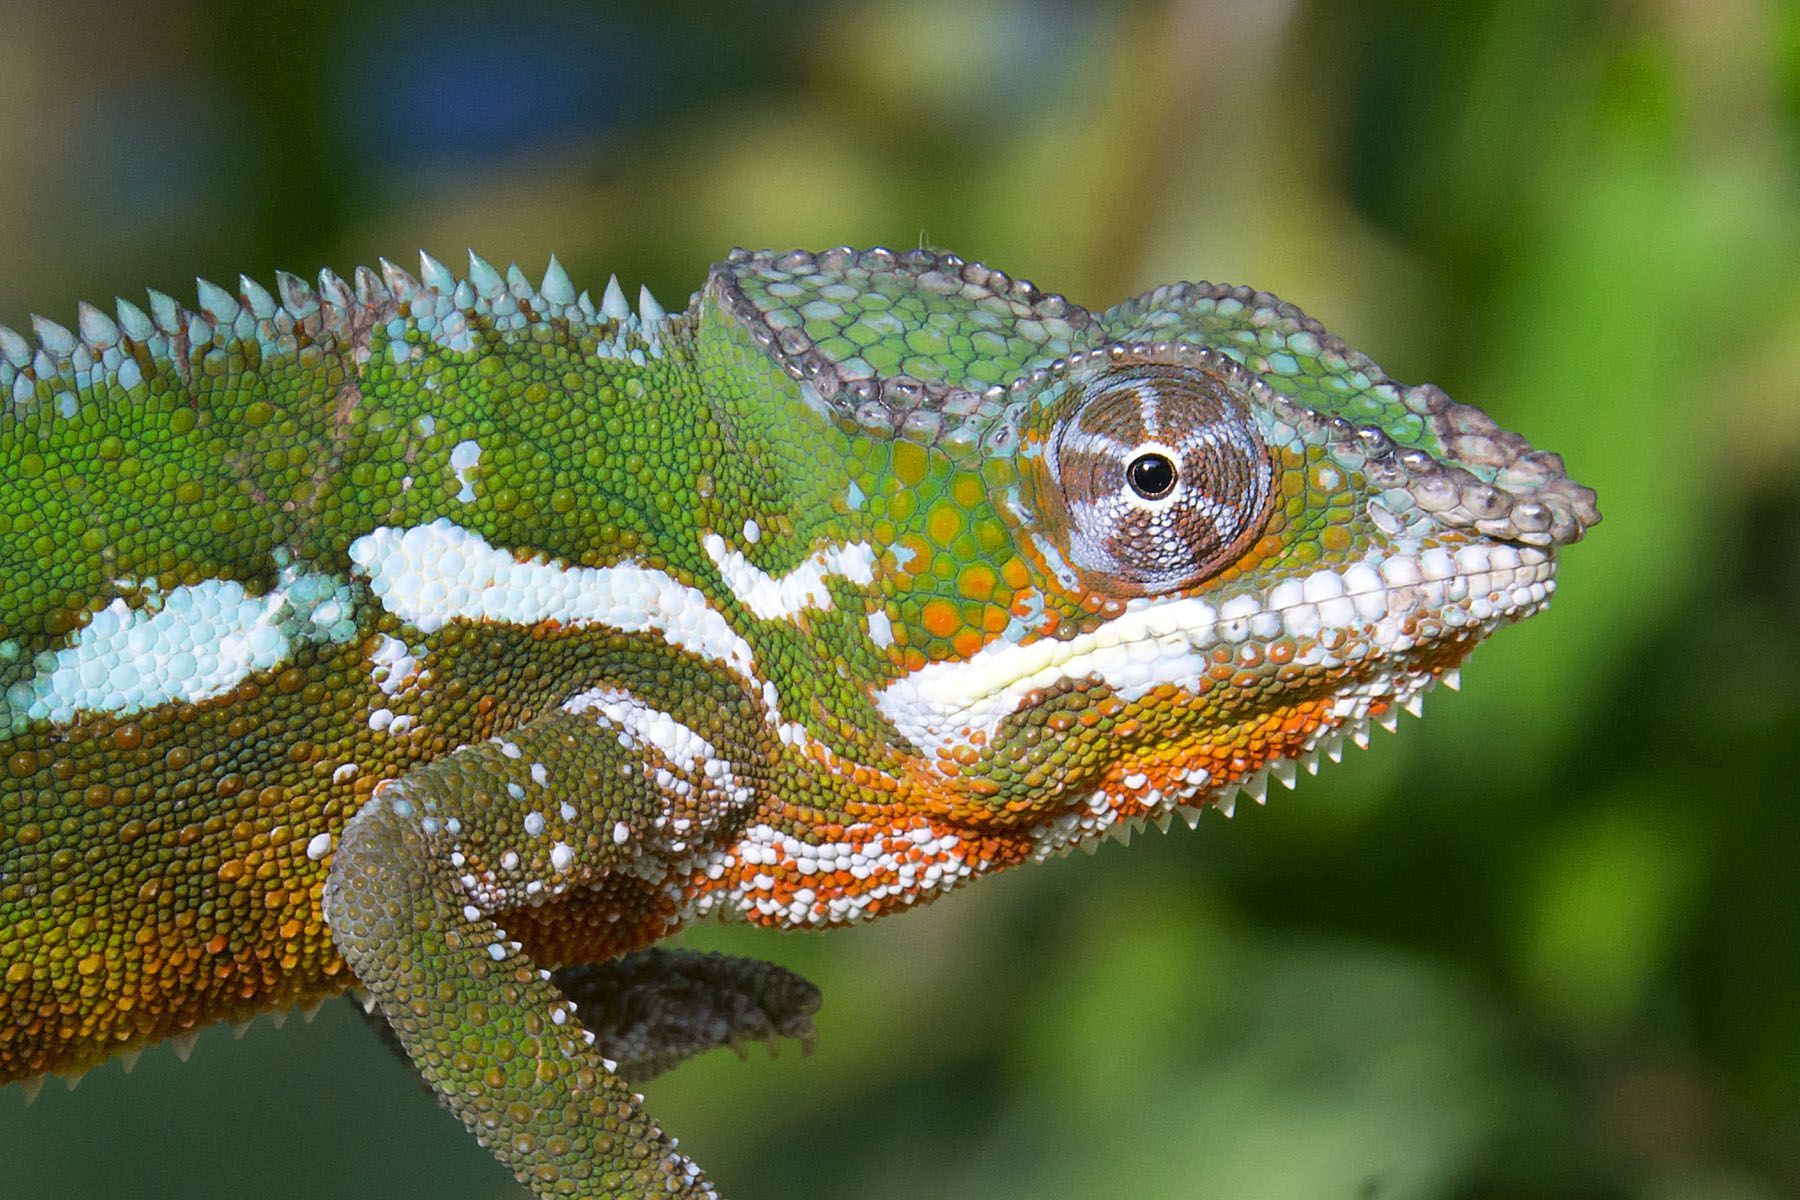 Panther Chameleon on a Madagascar photography tour with Dani Velasco